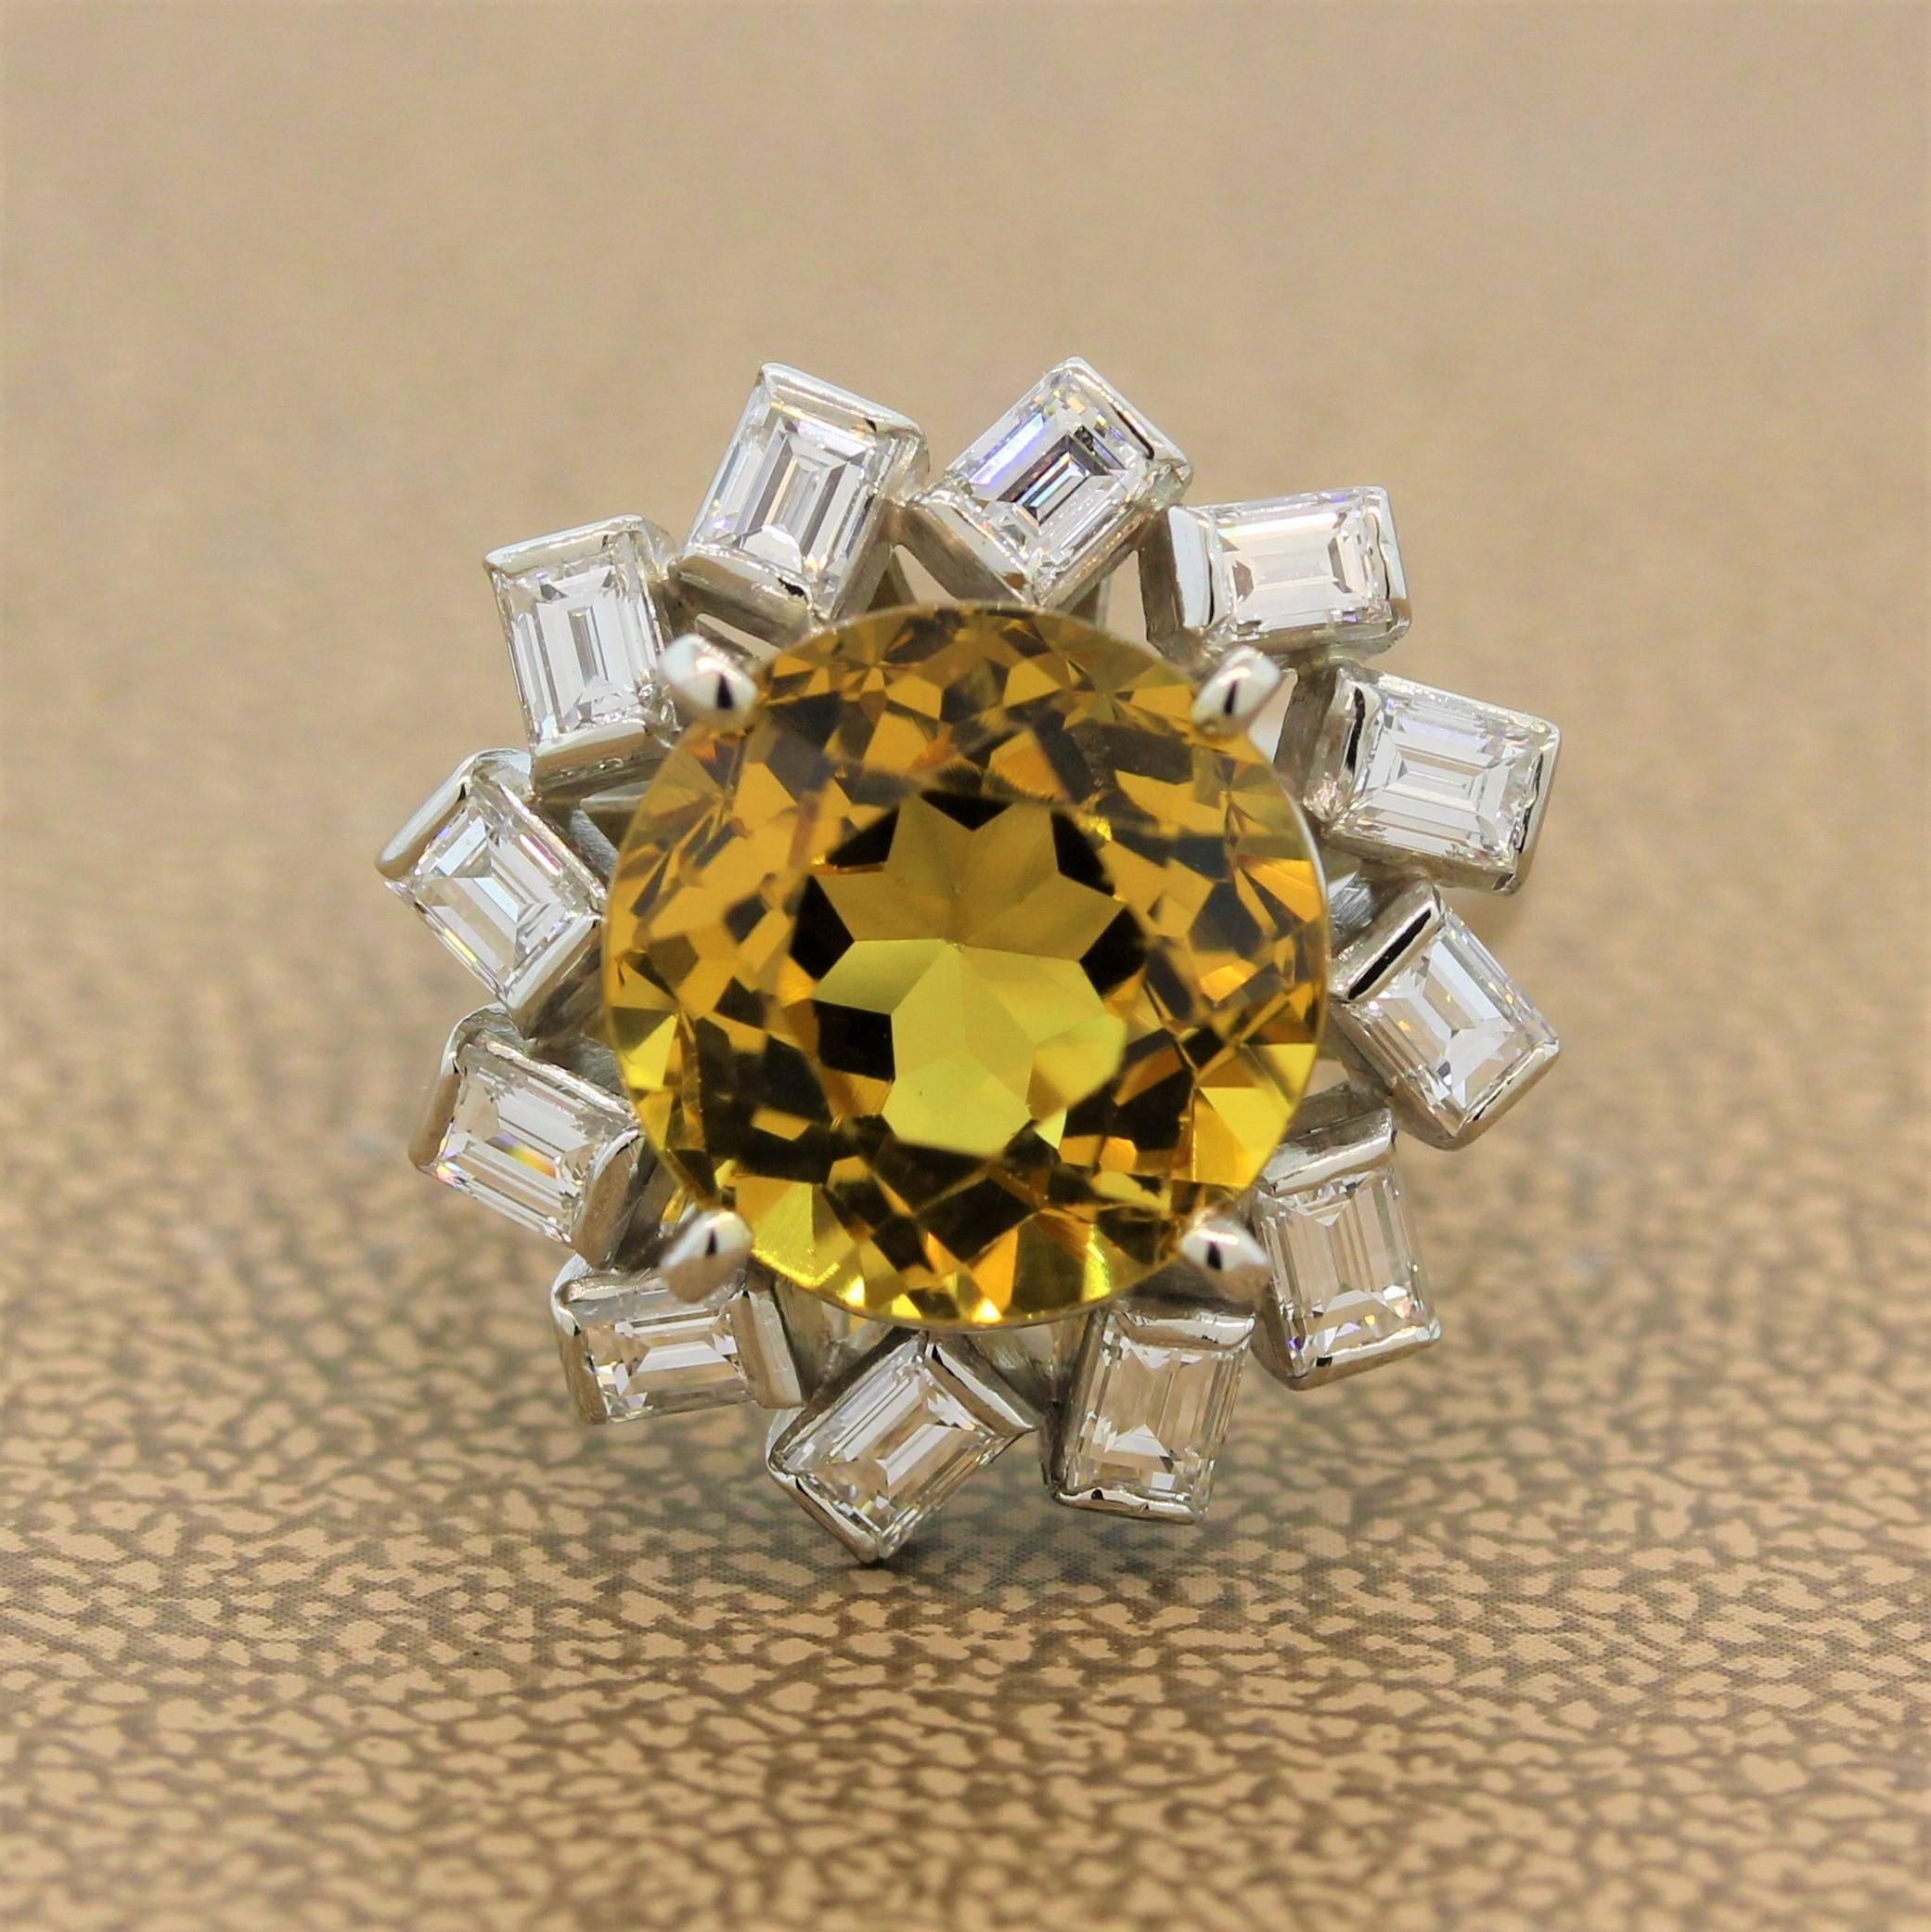 A vivid yellow tourmaline as bright as the sun is prong set in this delightful platinum ring, 5.10 carats. Haloing the round cut tourmaline are 1.20 carats of baguette cut diamonds in a swirling design. A simple yet stunning ring.

Ring Size 4.75